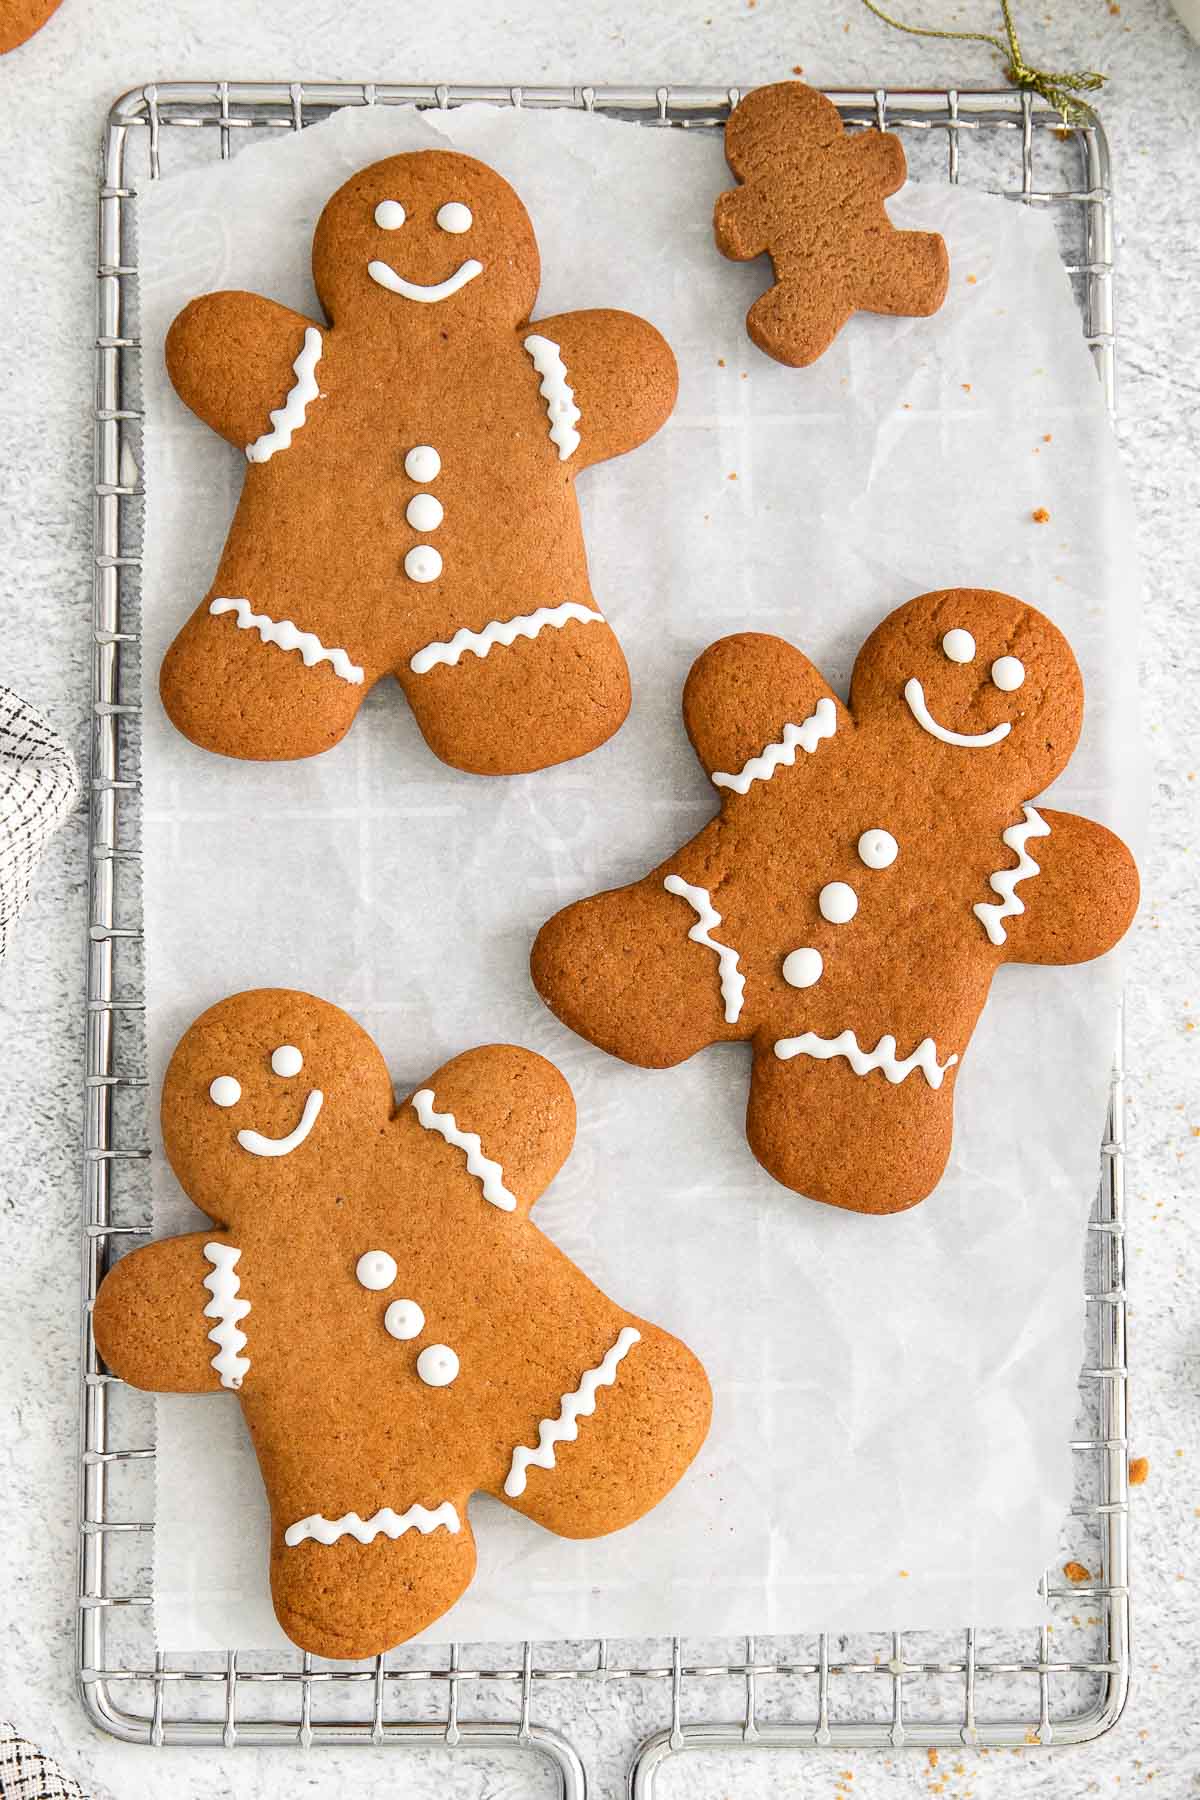 three decorated gingerbread men on a cooling rack with lined with parchment paper.